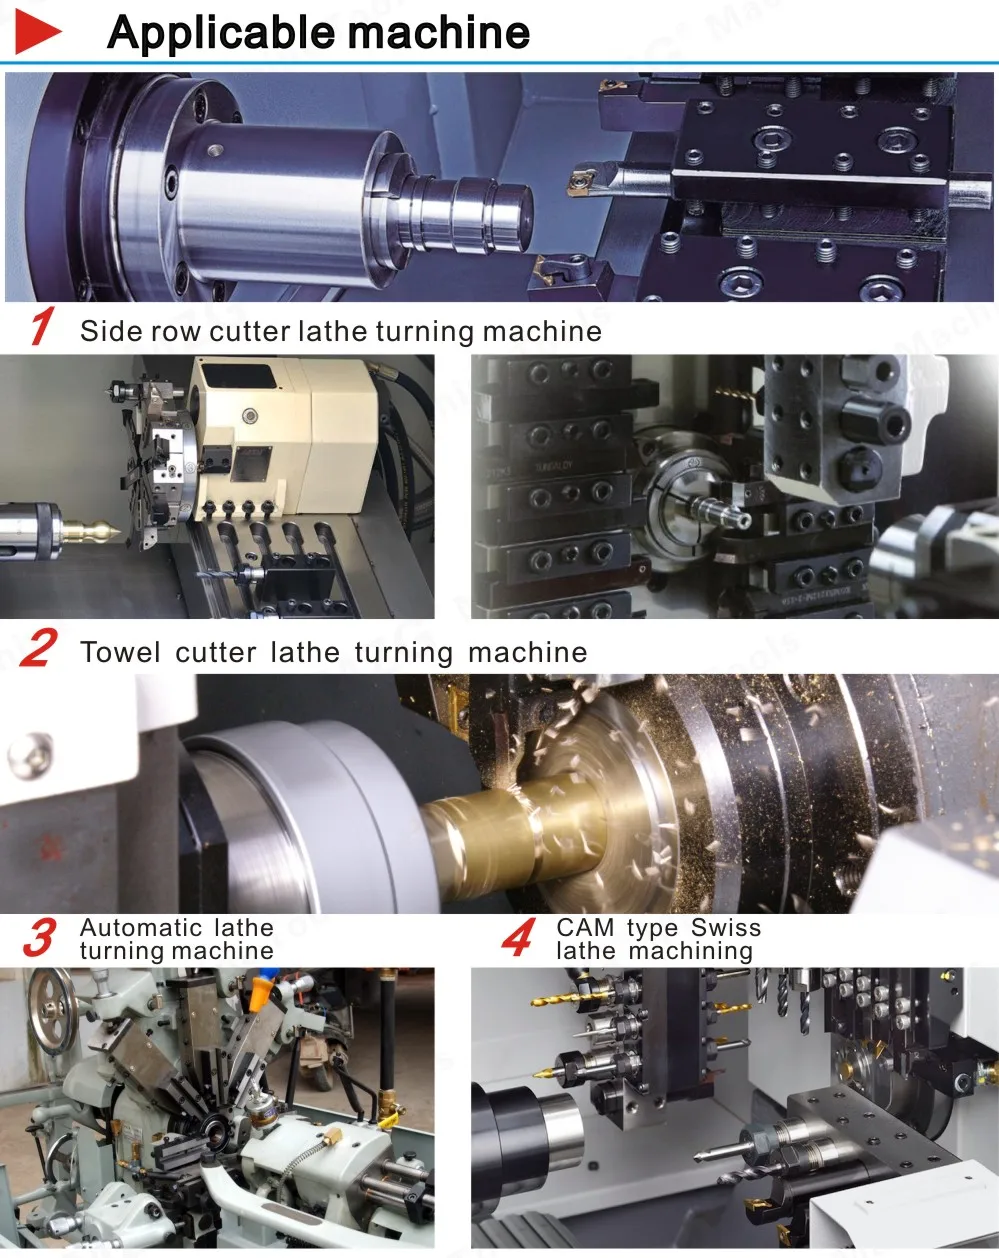 Turning Applicable machine